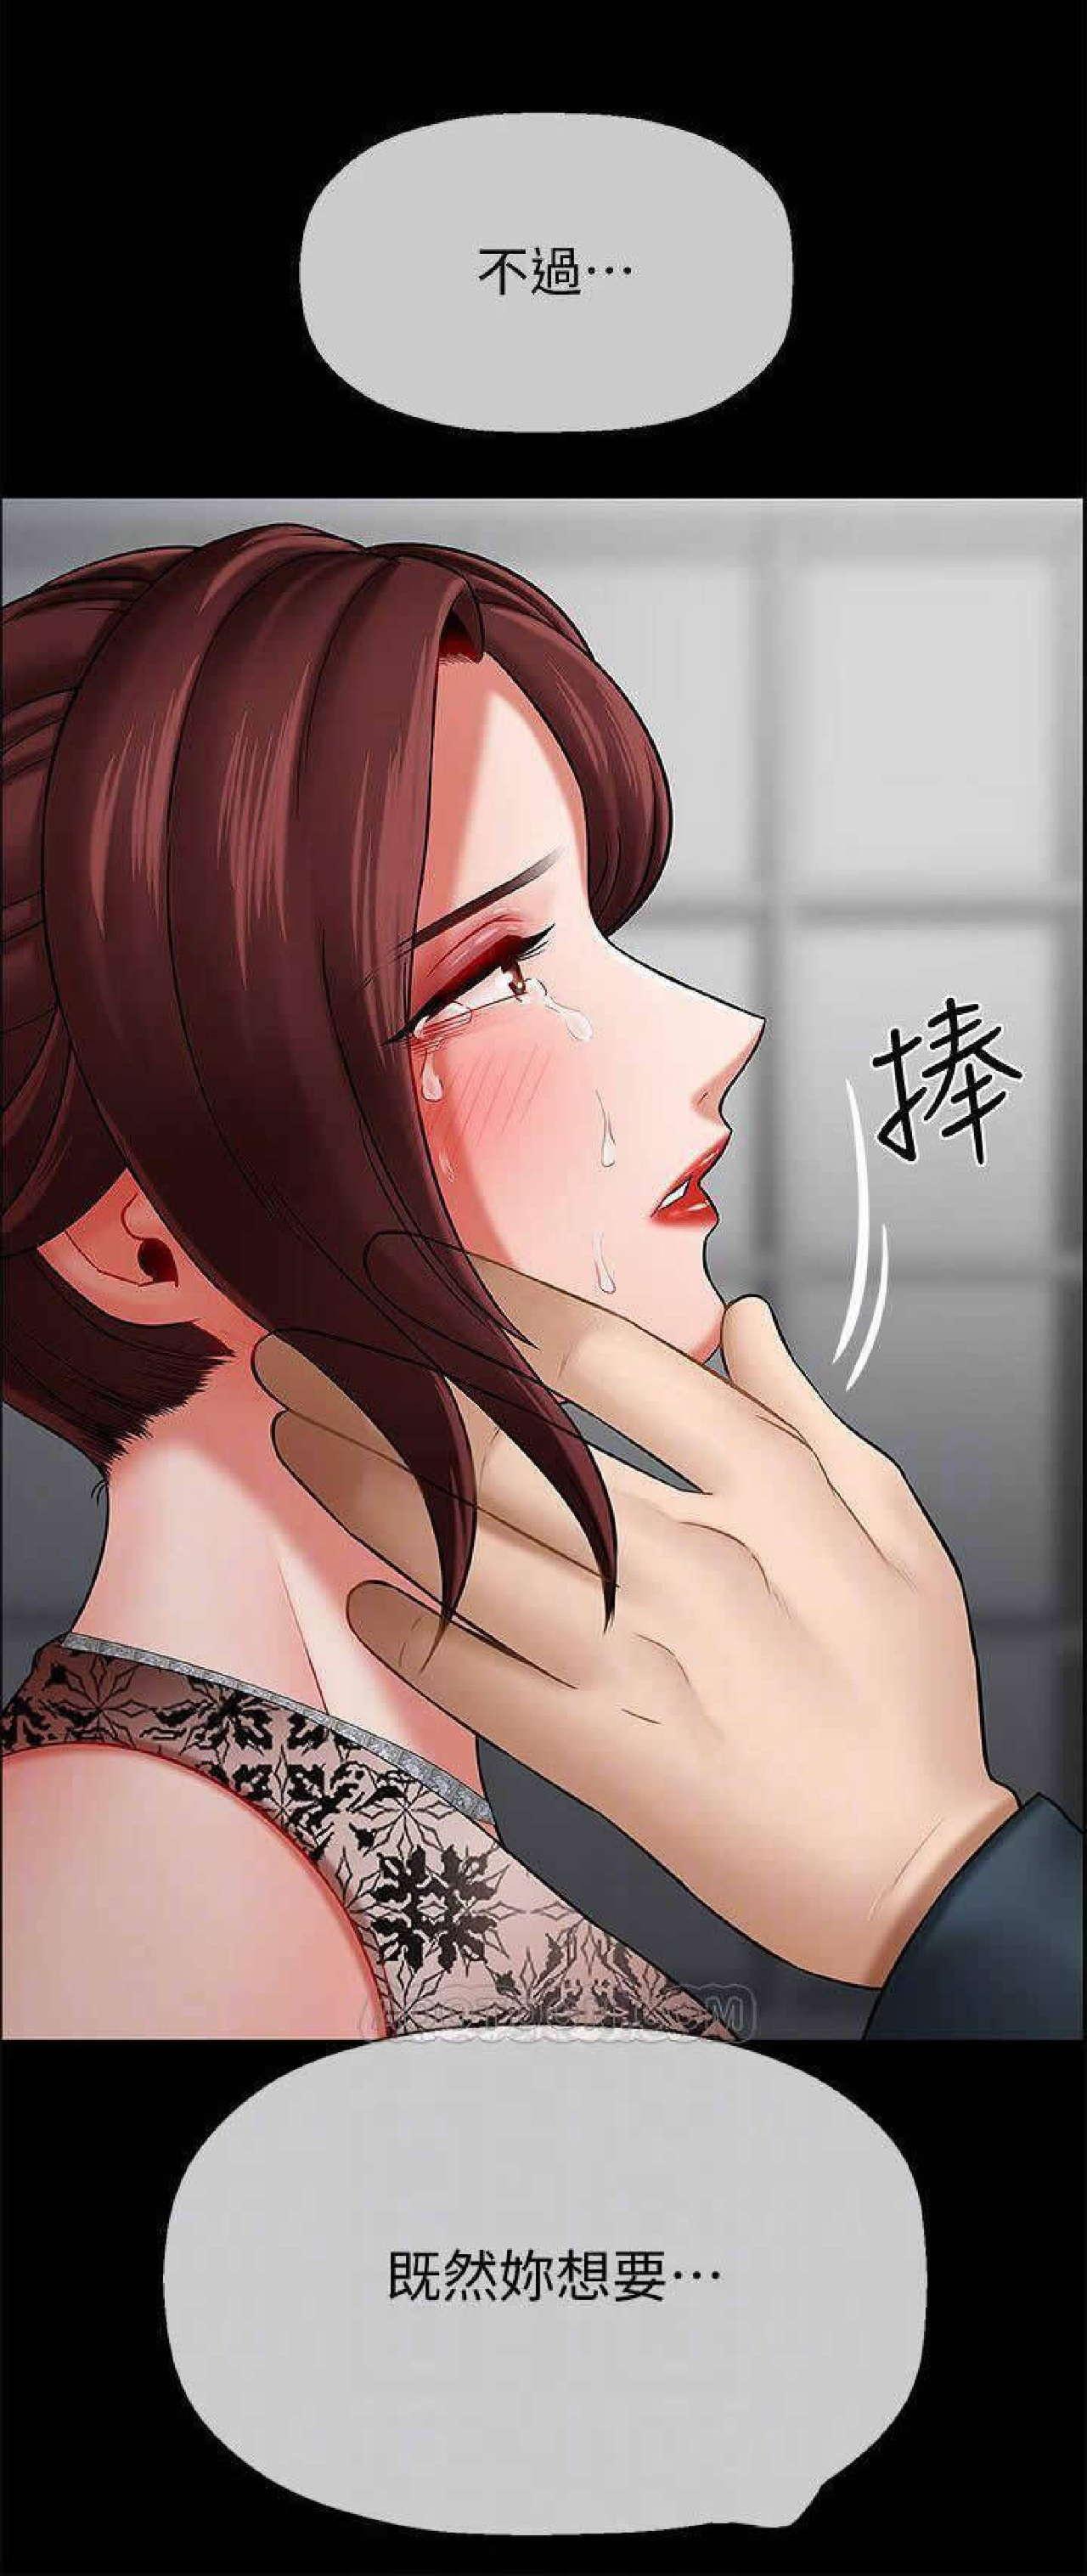 Moms 坏老师 | PHYSICAL CLASSROOM 8 Hardcore Rough Sex - Page 5